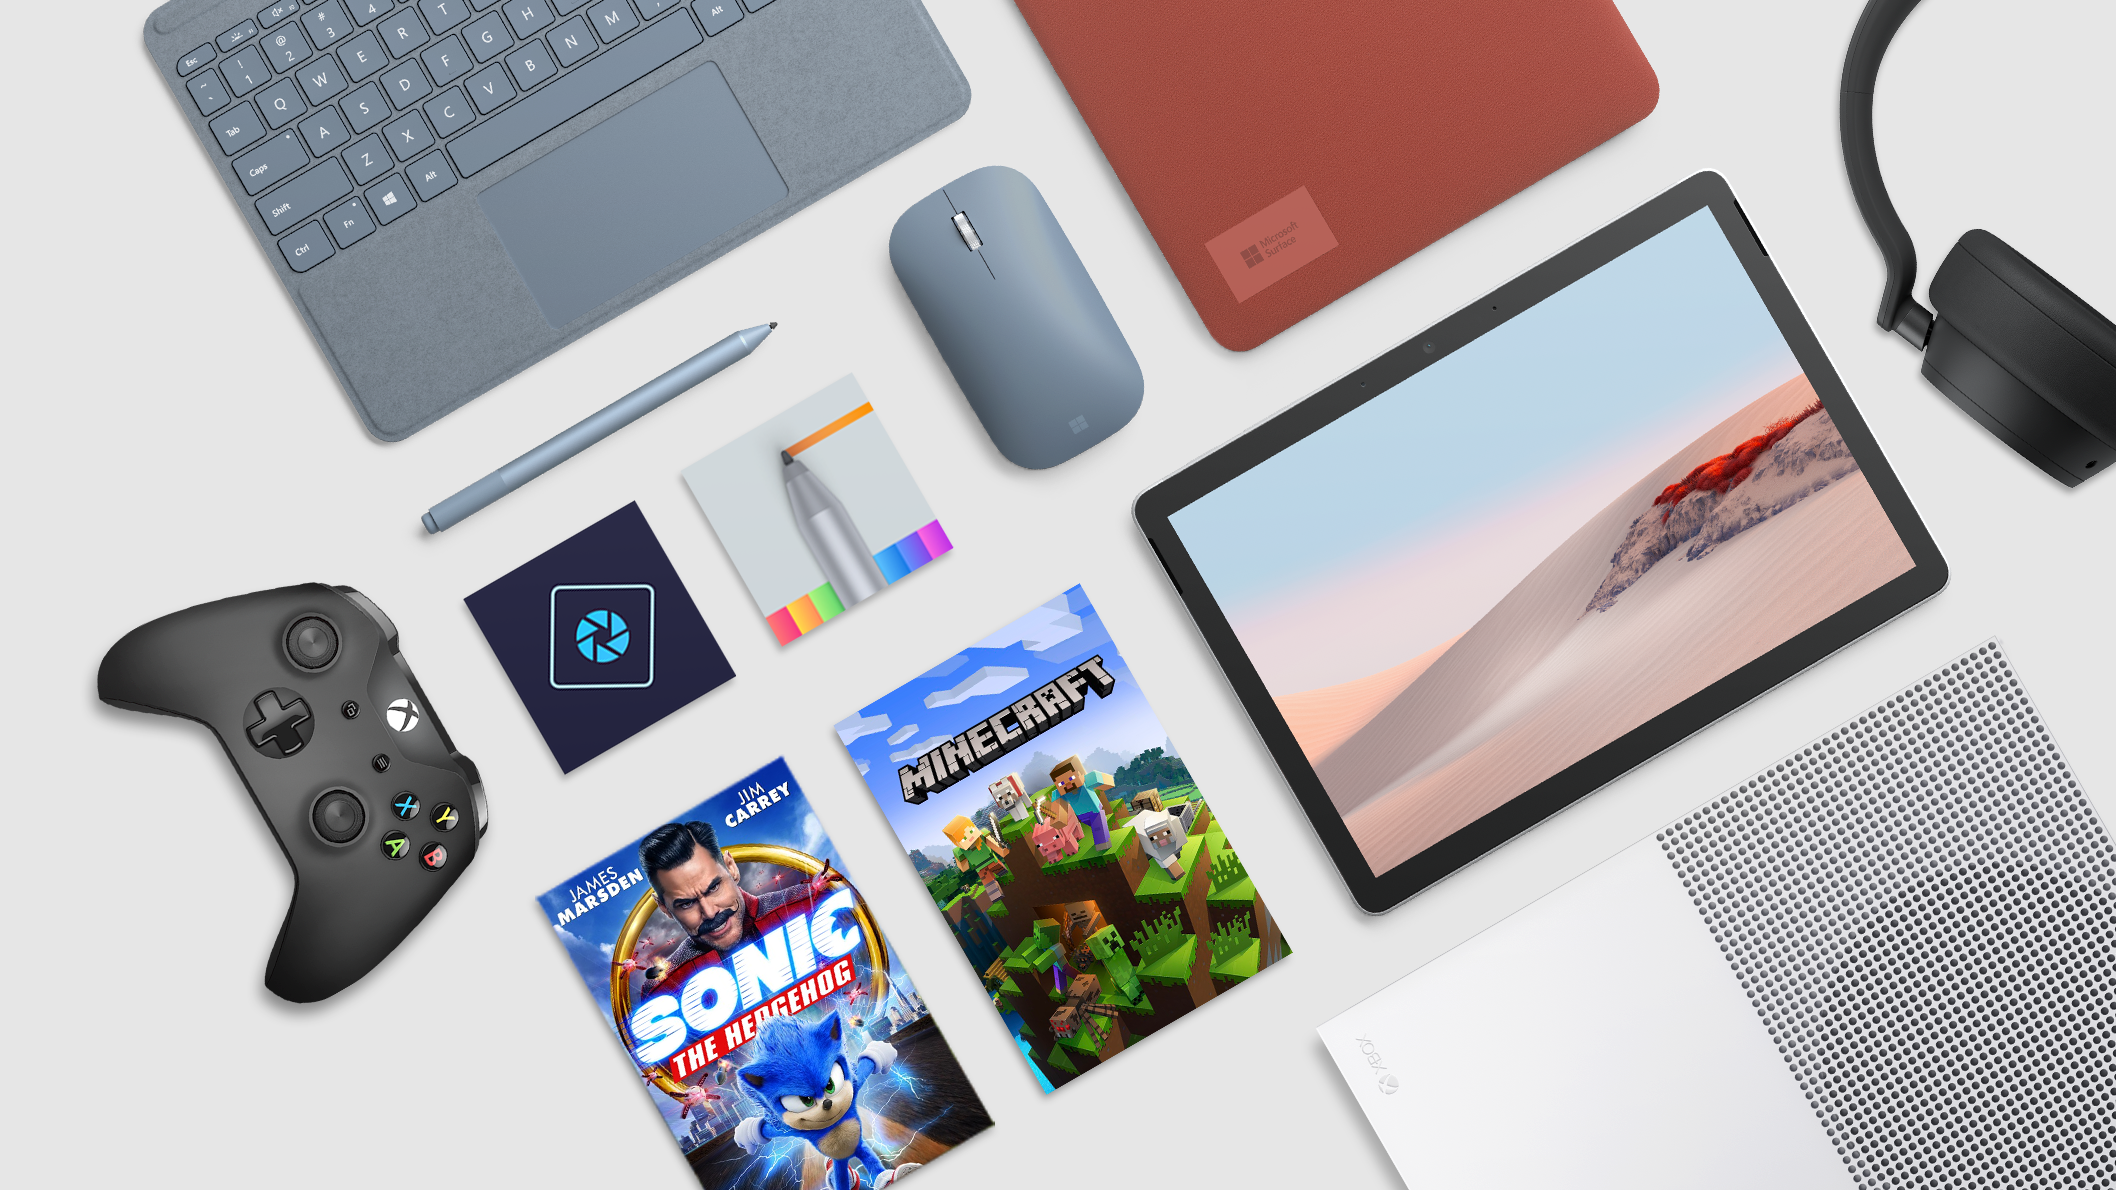 what can you get with a microsoft gift card